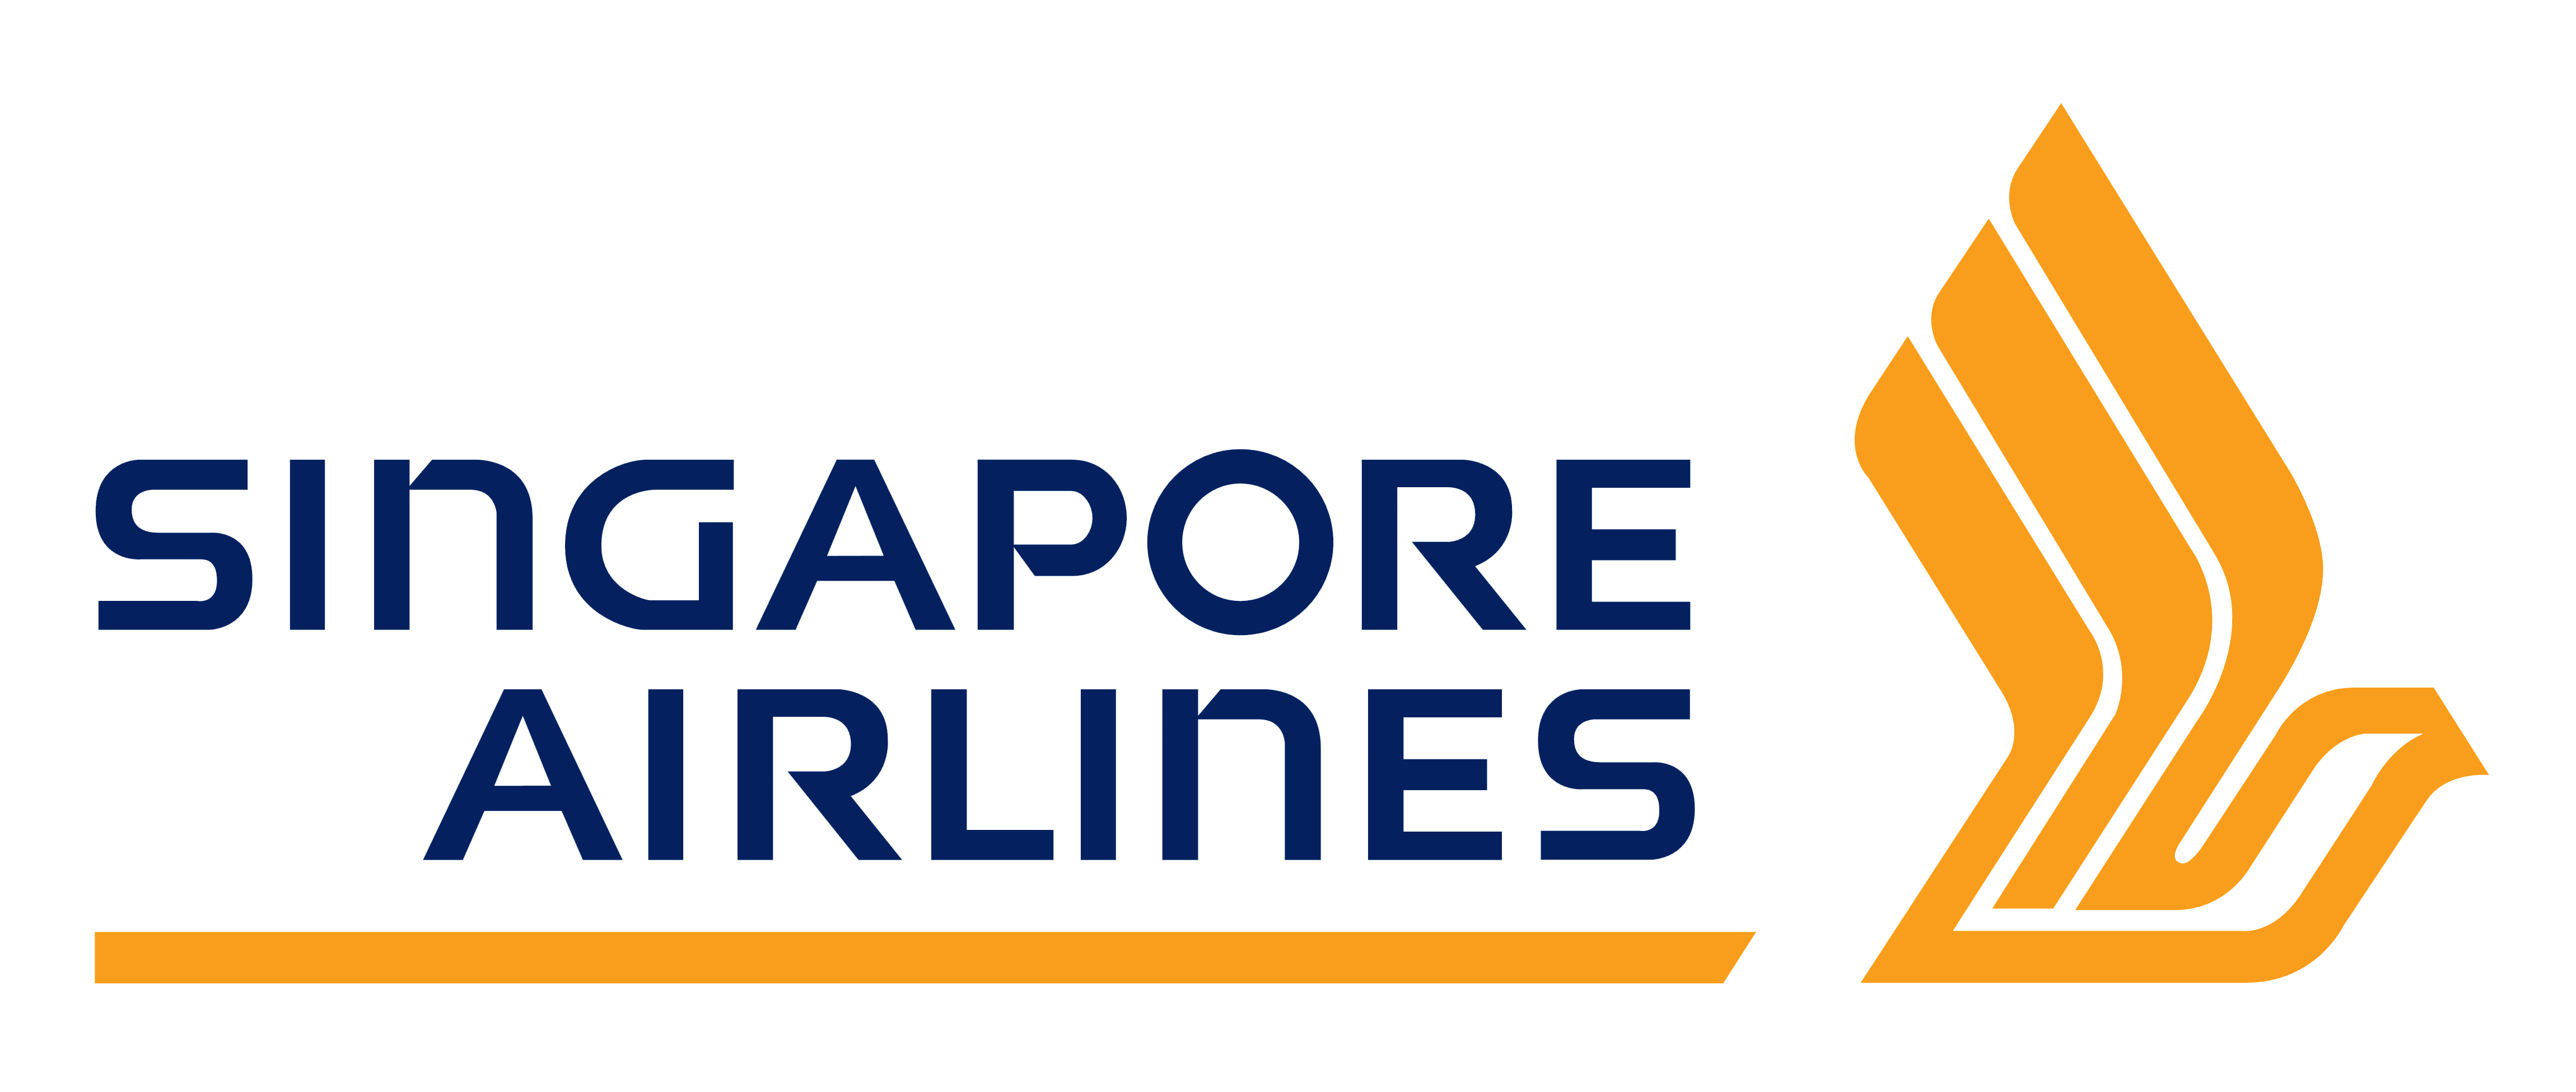 Logo Singapore Airlines Png Hdpng.com 4600 - Singapore Airlines, Transparent background PNG HD thumbnail